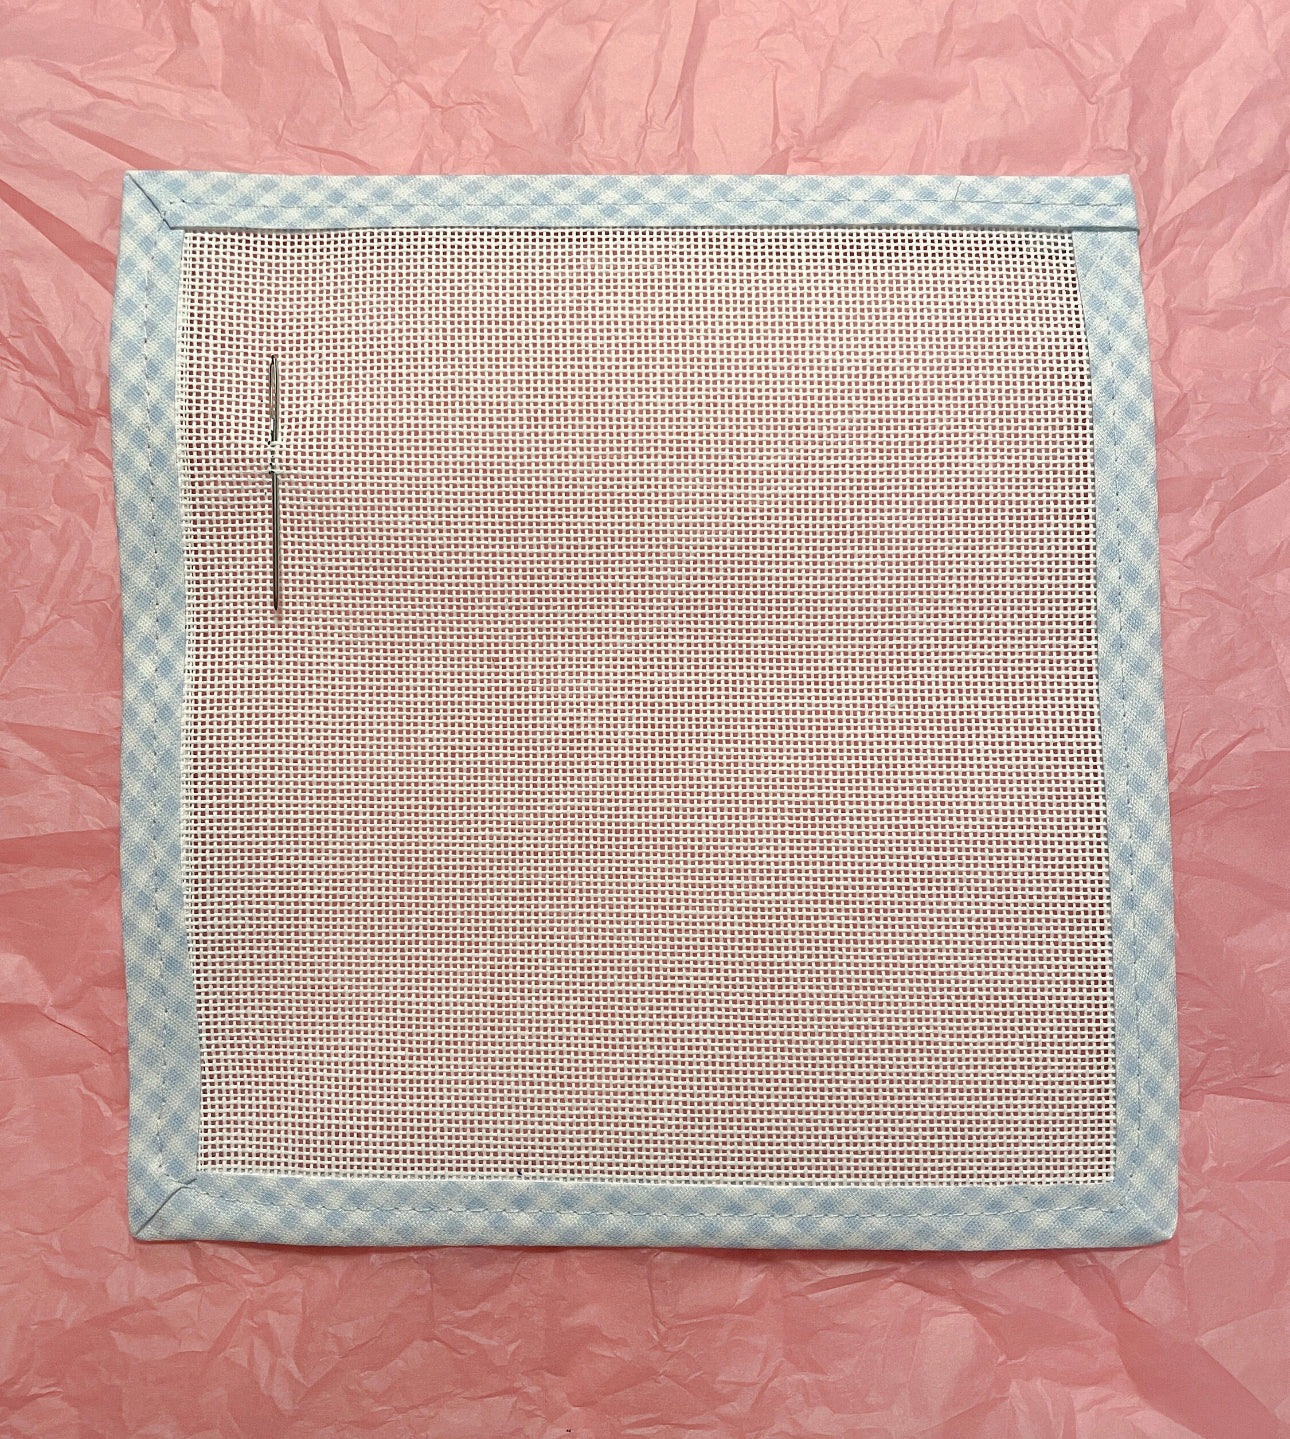 Blank Needlepoint Canvas For 4” Design - 8x8”